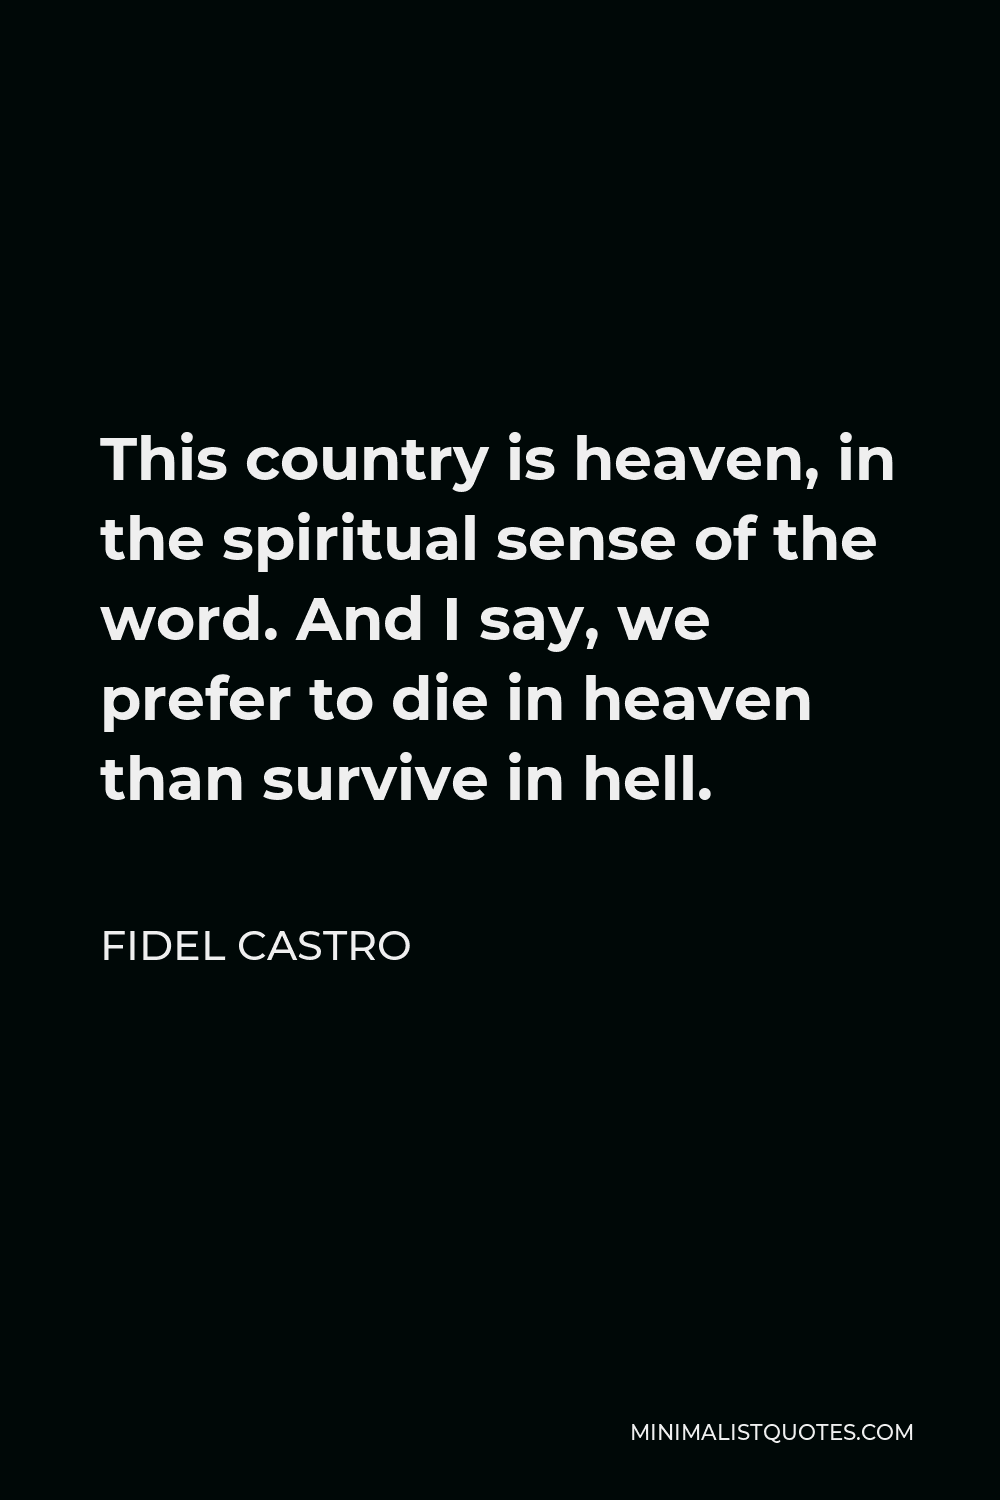 Fidel Castro Quote - This country is heaven, in the spiritual sense of the word. And I say, we prefer to die in heaven than survive in hell.